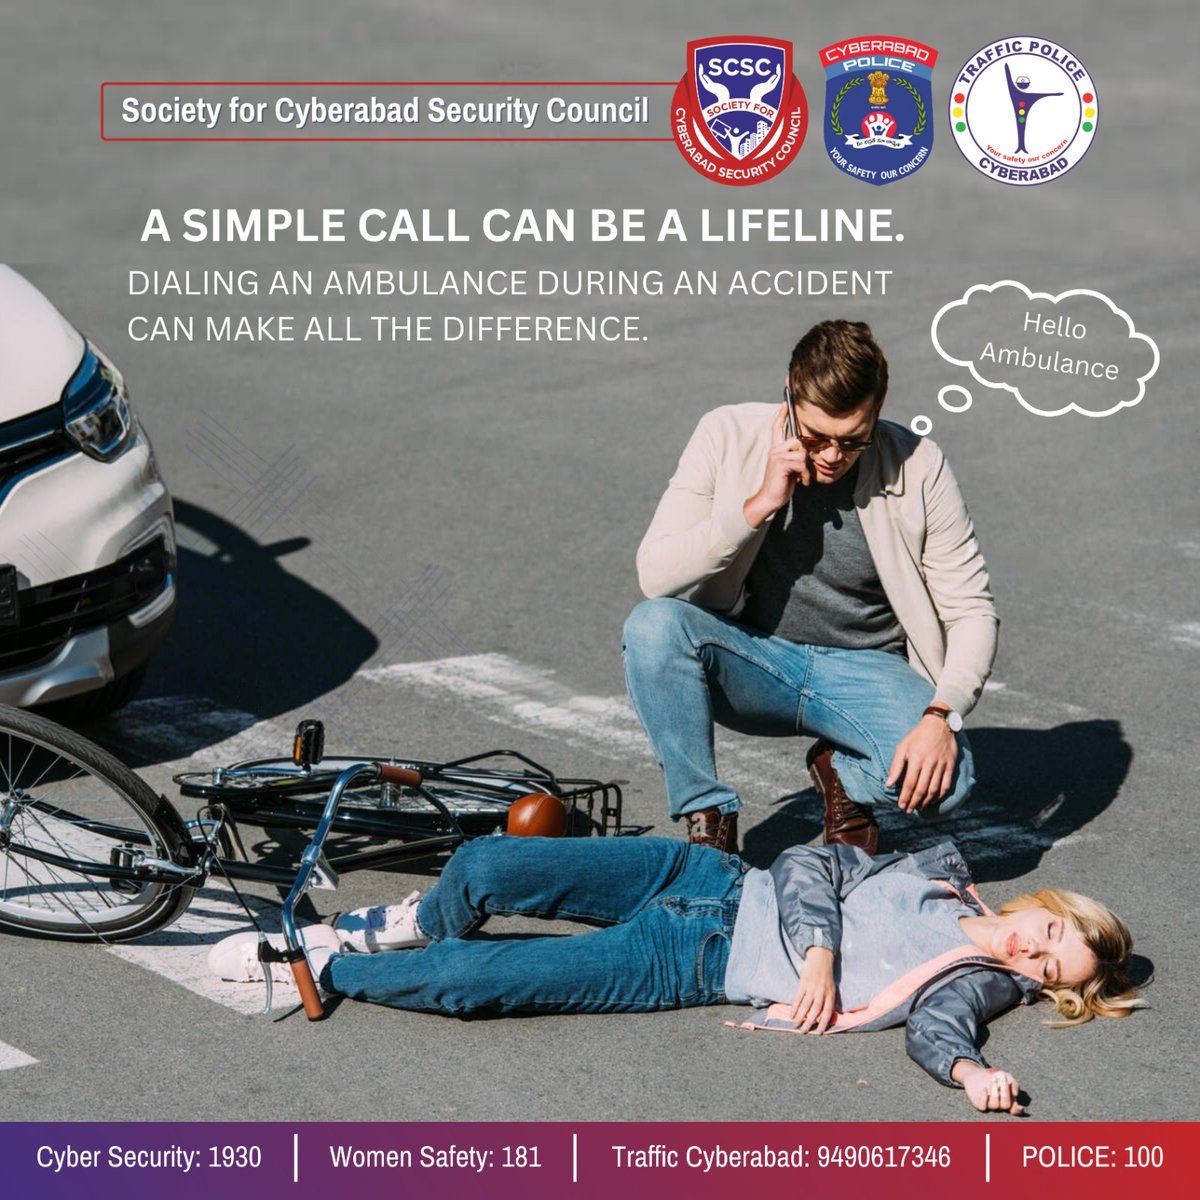 🚑 A Simple Call Can Save a Life! 🚨

☎️ In an emergency, dialing an ambulance can be the critical link between life and death. 🏥
📞So, Make that call without a second thought– it's a hero's move.

#AmbulanceService #EmergencyResponse #SaveLives #QuickAction #SafetyFirst